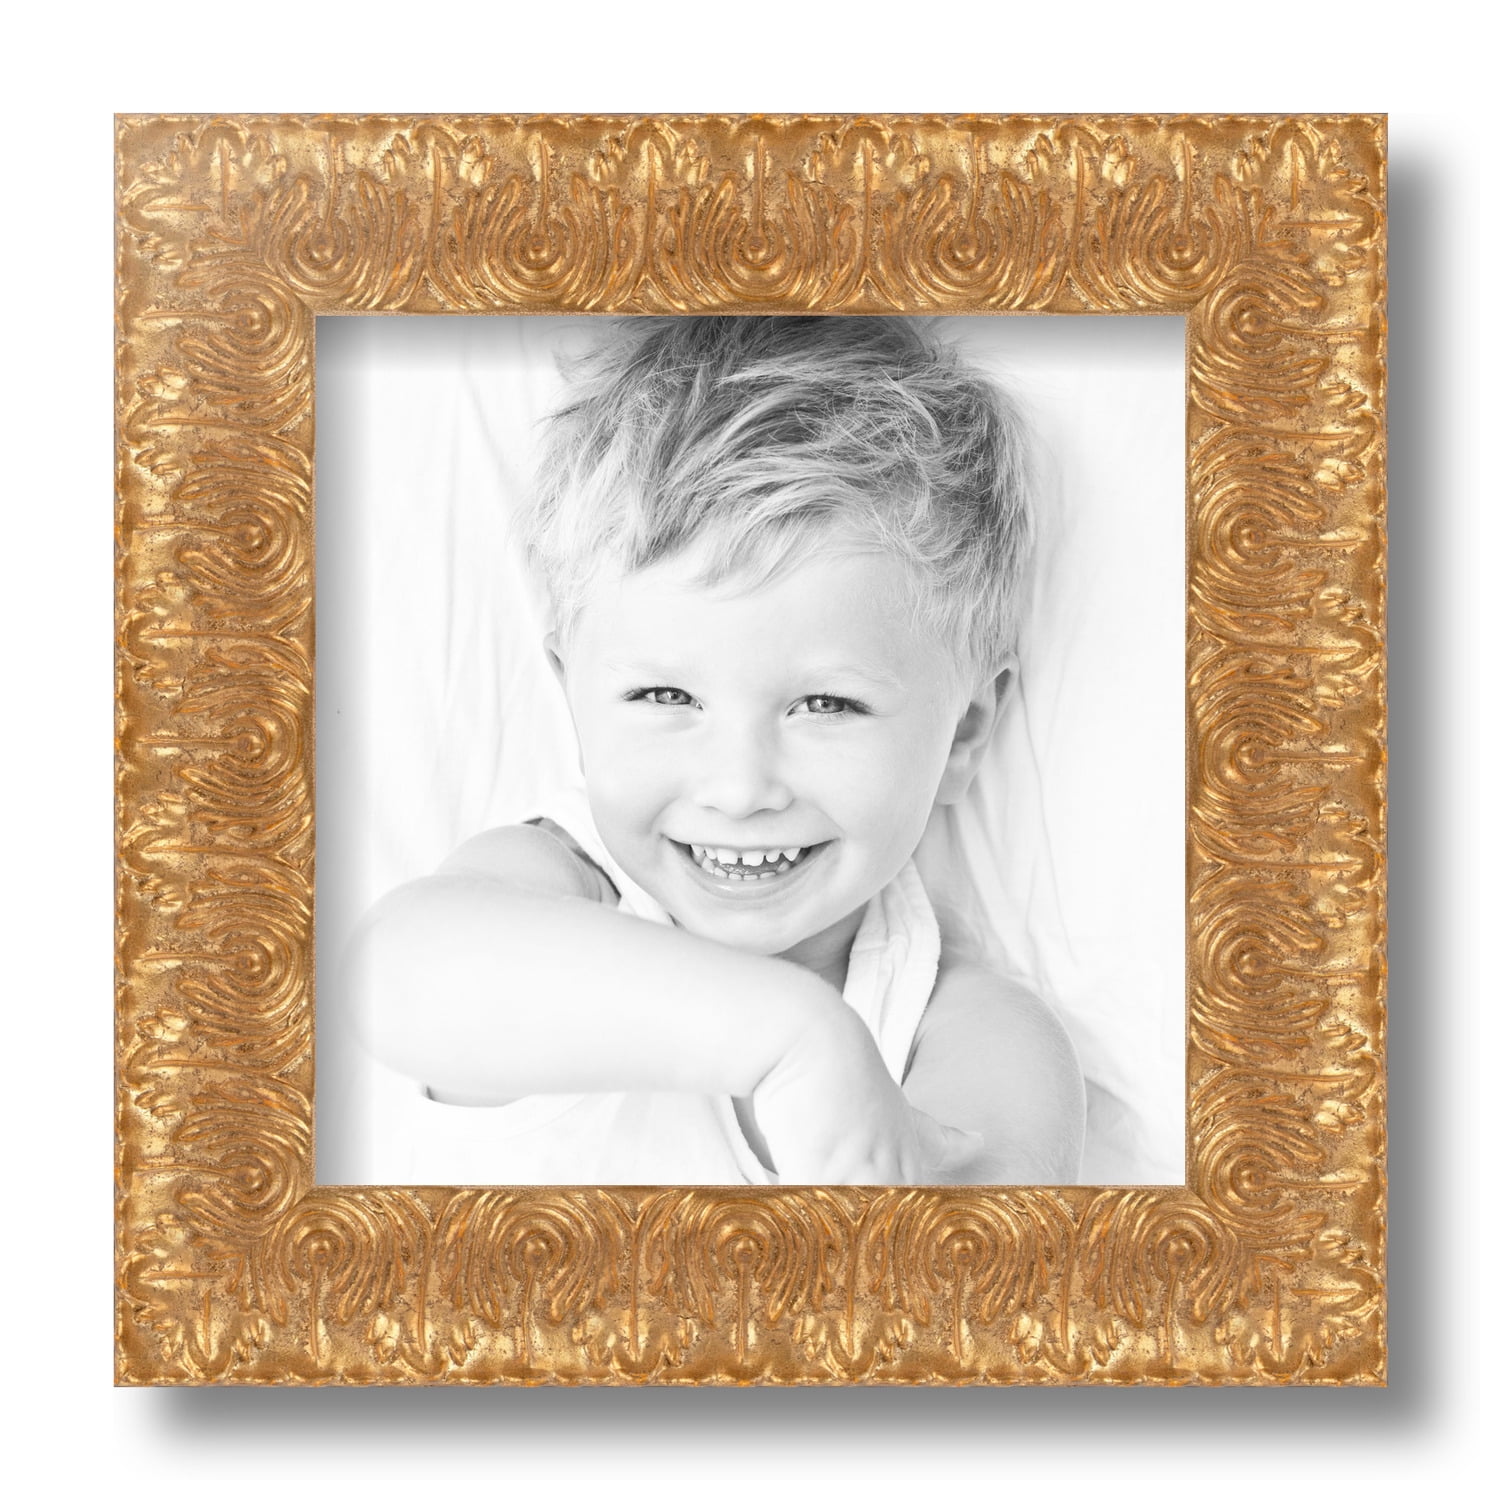 ArtToFrames 8x8 Inch Gold and Black Picture Frame, This Gold Wood Poster  Frame is Great for Your Art or Photos, Comes with Regular Glass (4902)